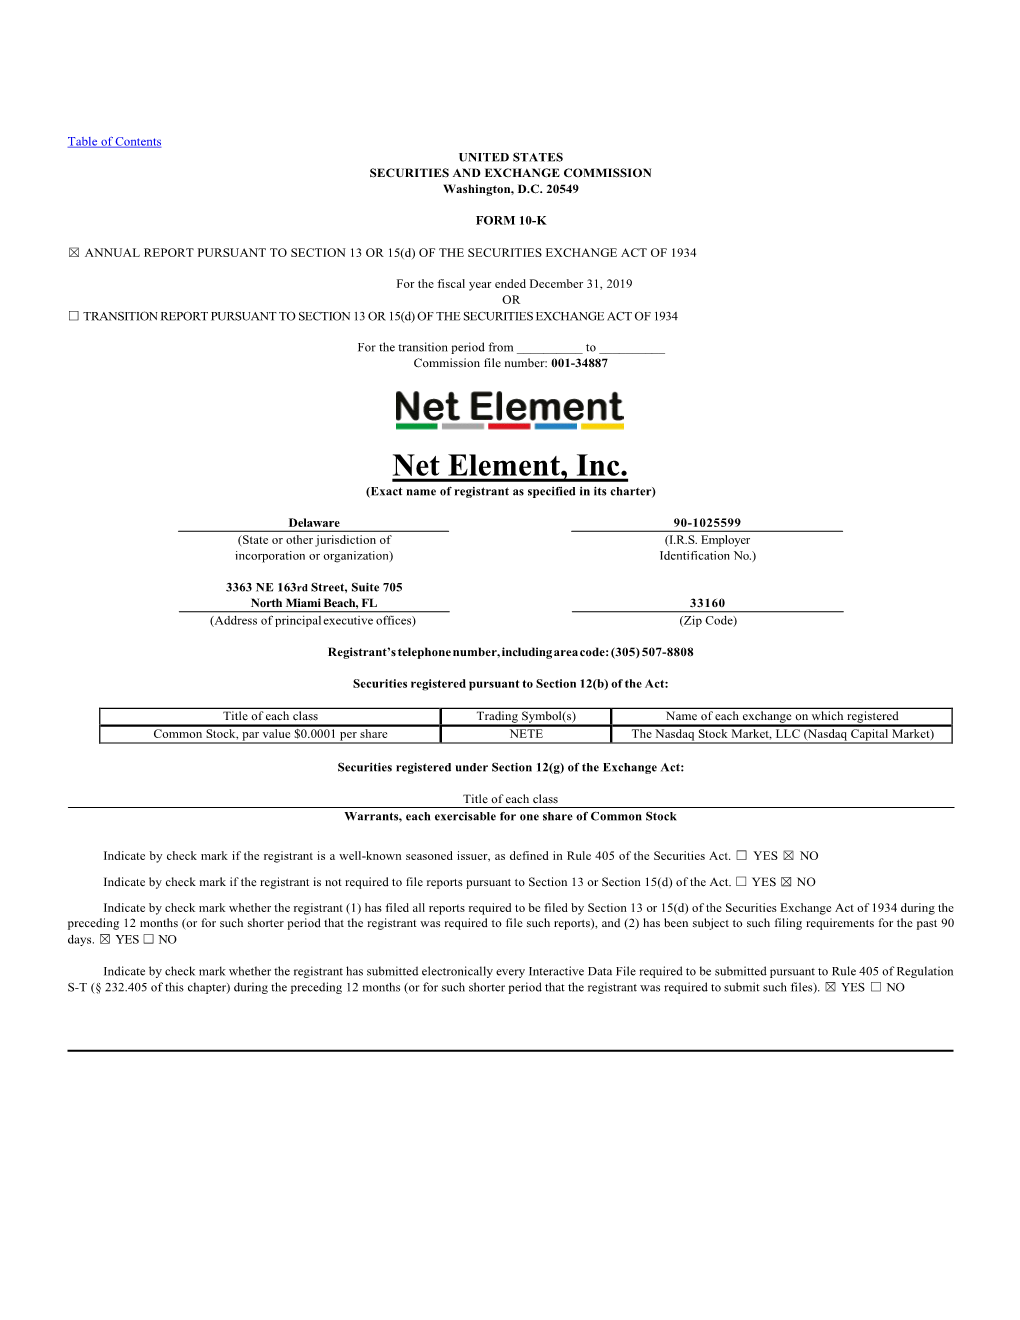 Net Element, Inc. (Exact Name of Registrant As Specified in Its Charter)